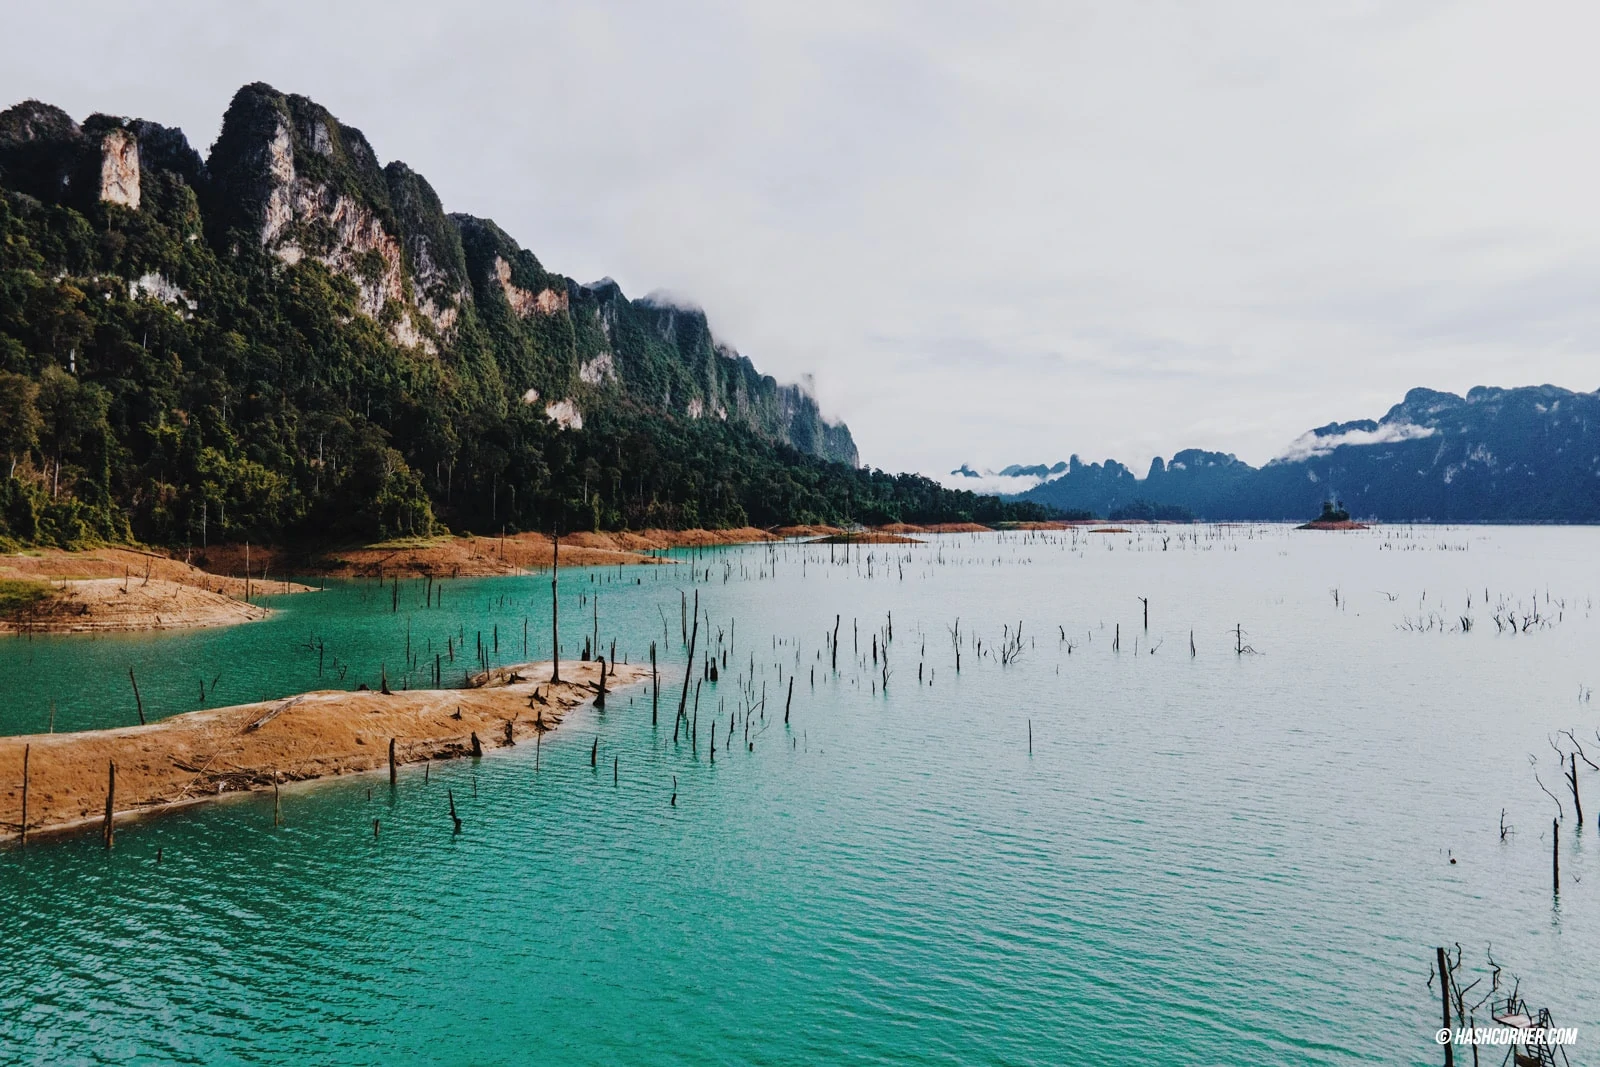 Surat Thani: A Local&#8217;s In-depth Travel Review